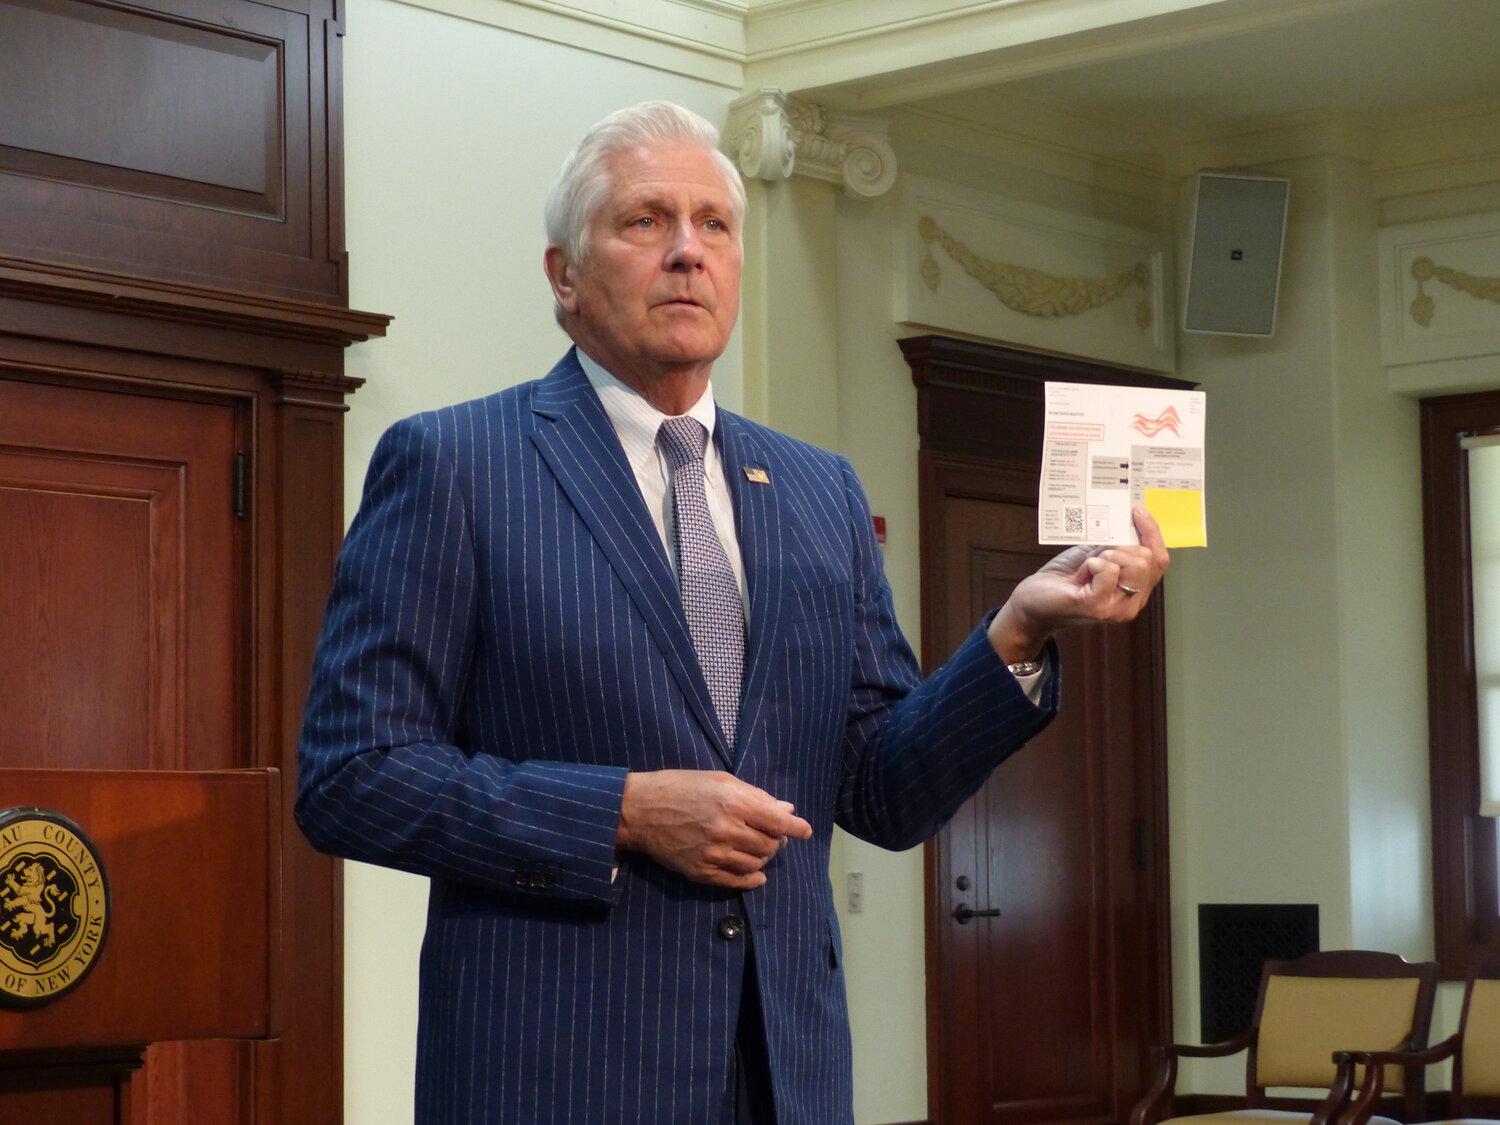 Nassau County Executive Bruce Blakeman displays a voter card he said was sent to a voter in his jurisdiction, incorrectly labeling them as a registered Democrat. According to Phoenix Graphics, the cause was human error.